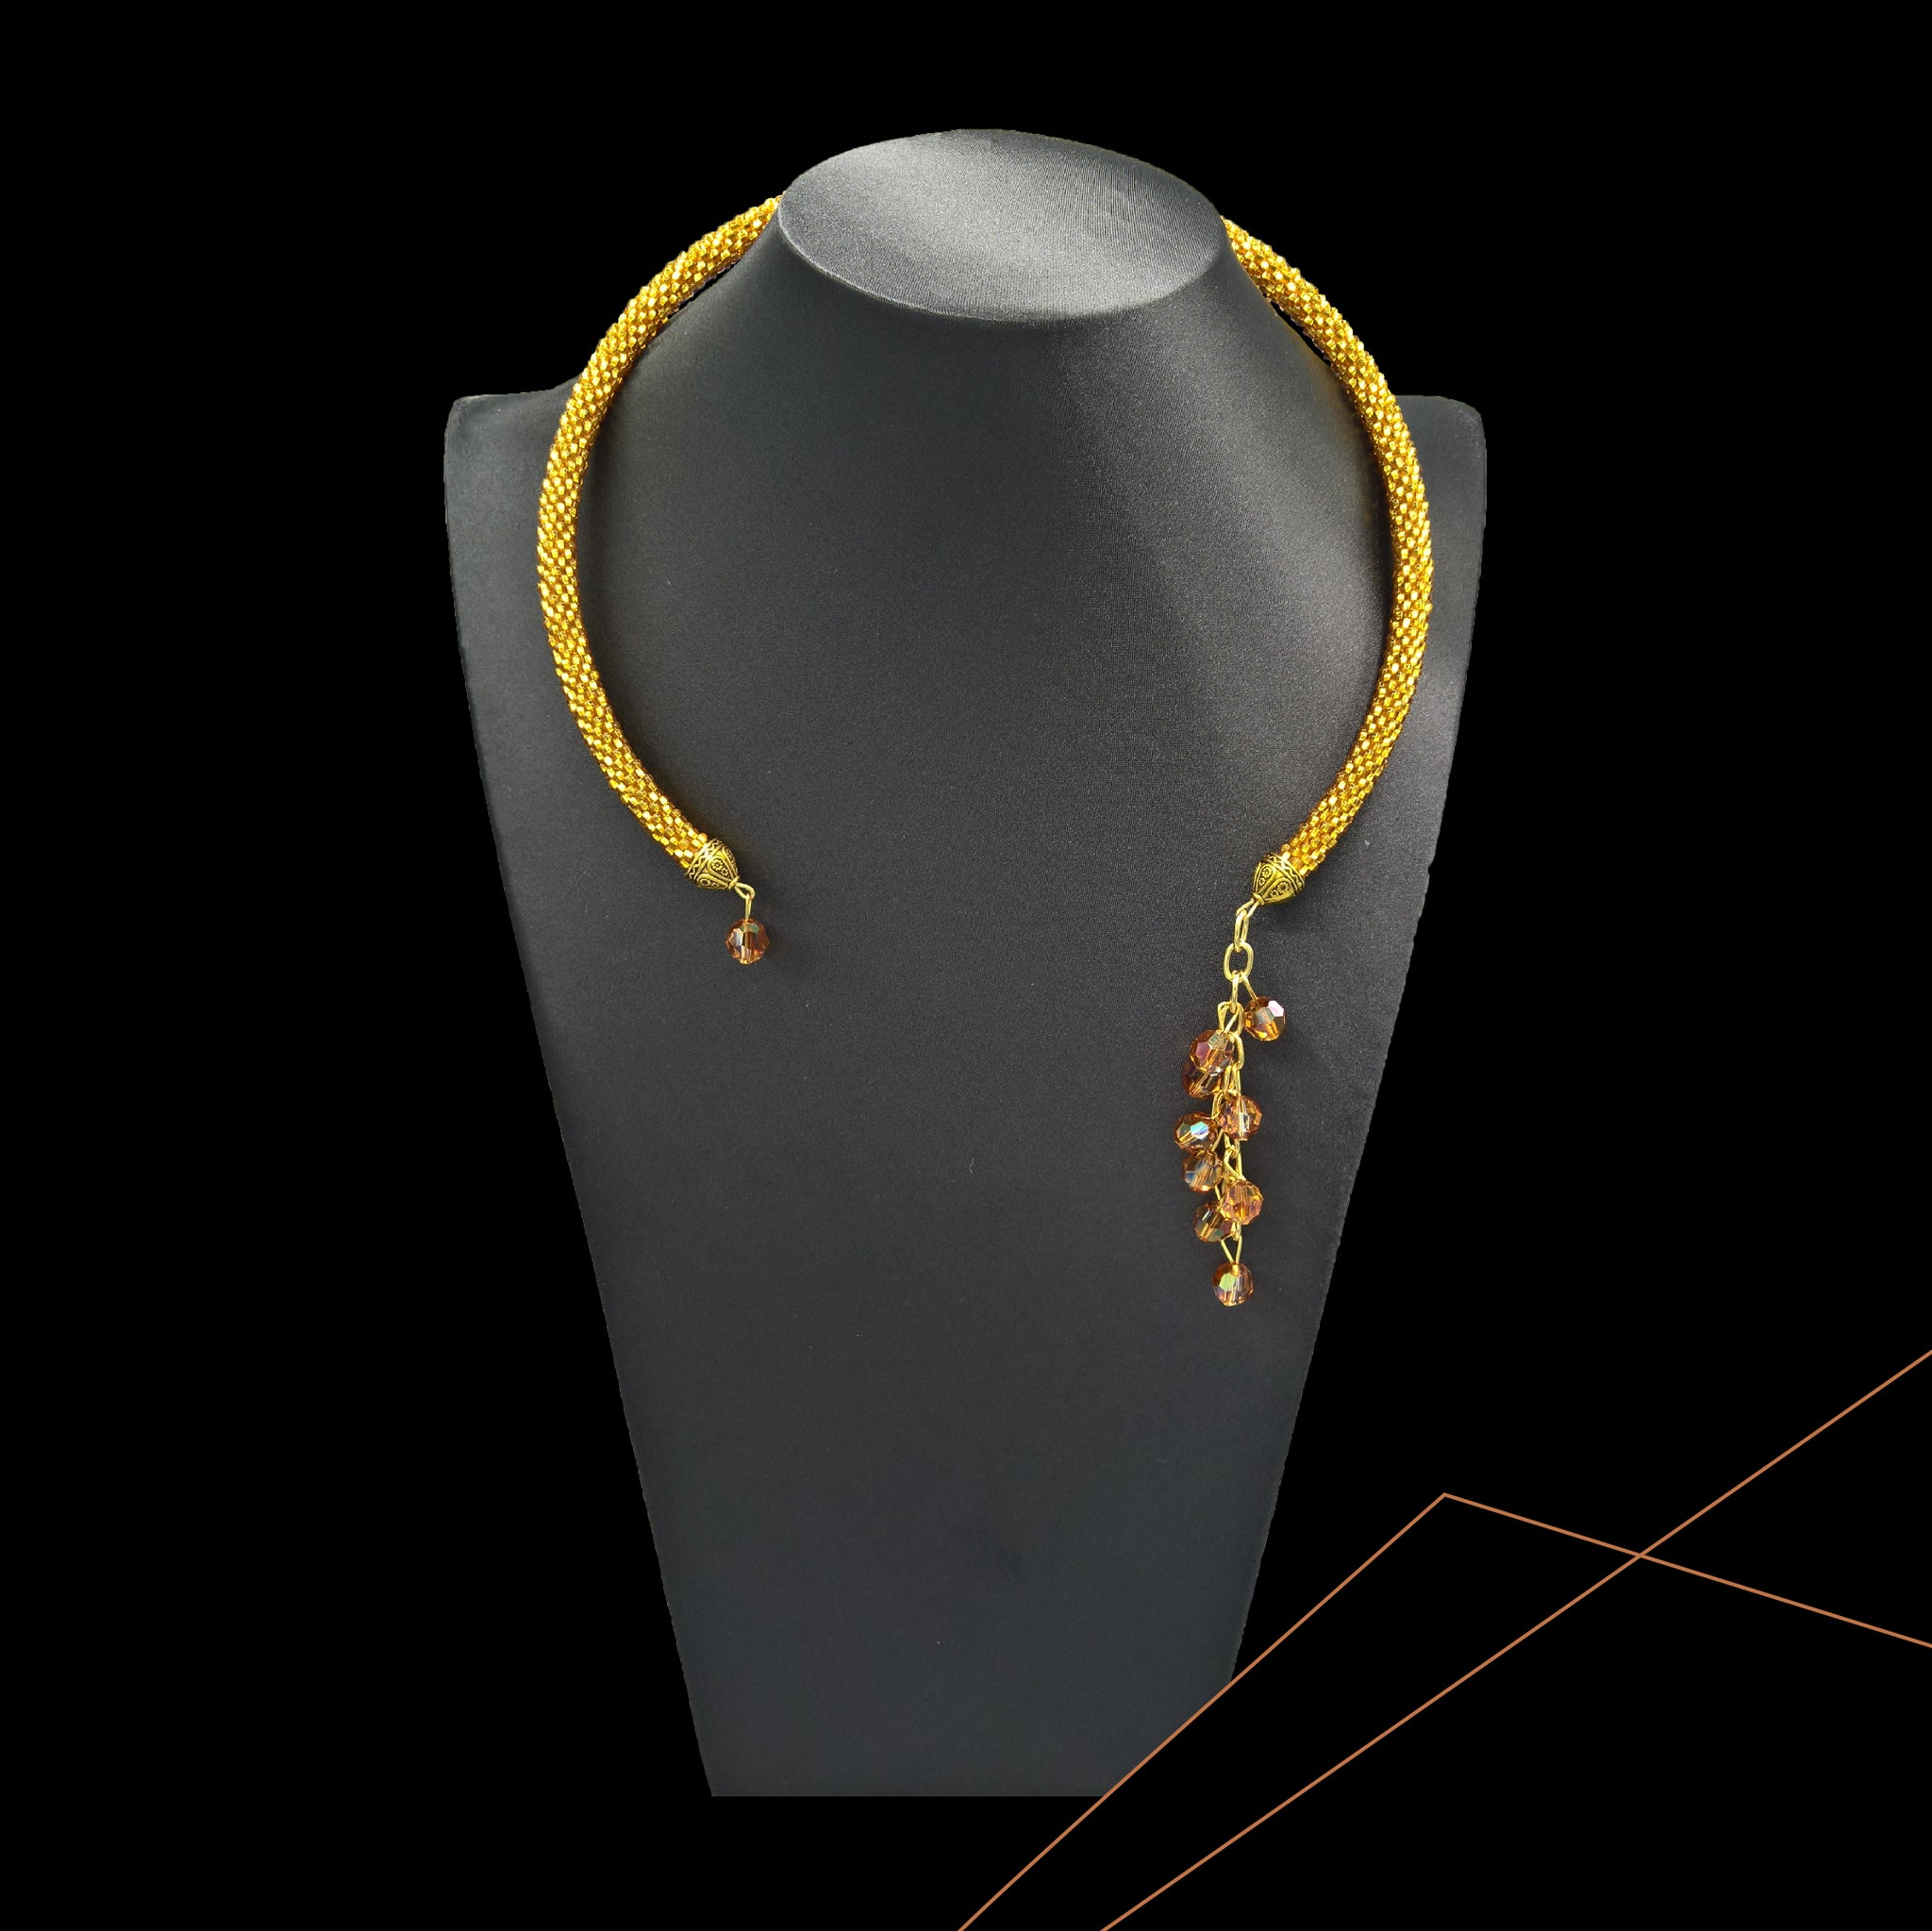 Inverted golden necklace with Swarovski crystal beads